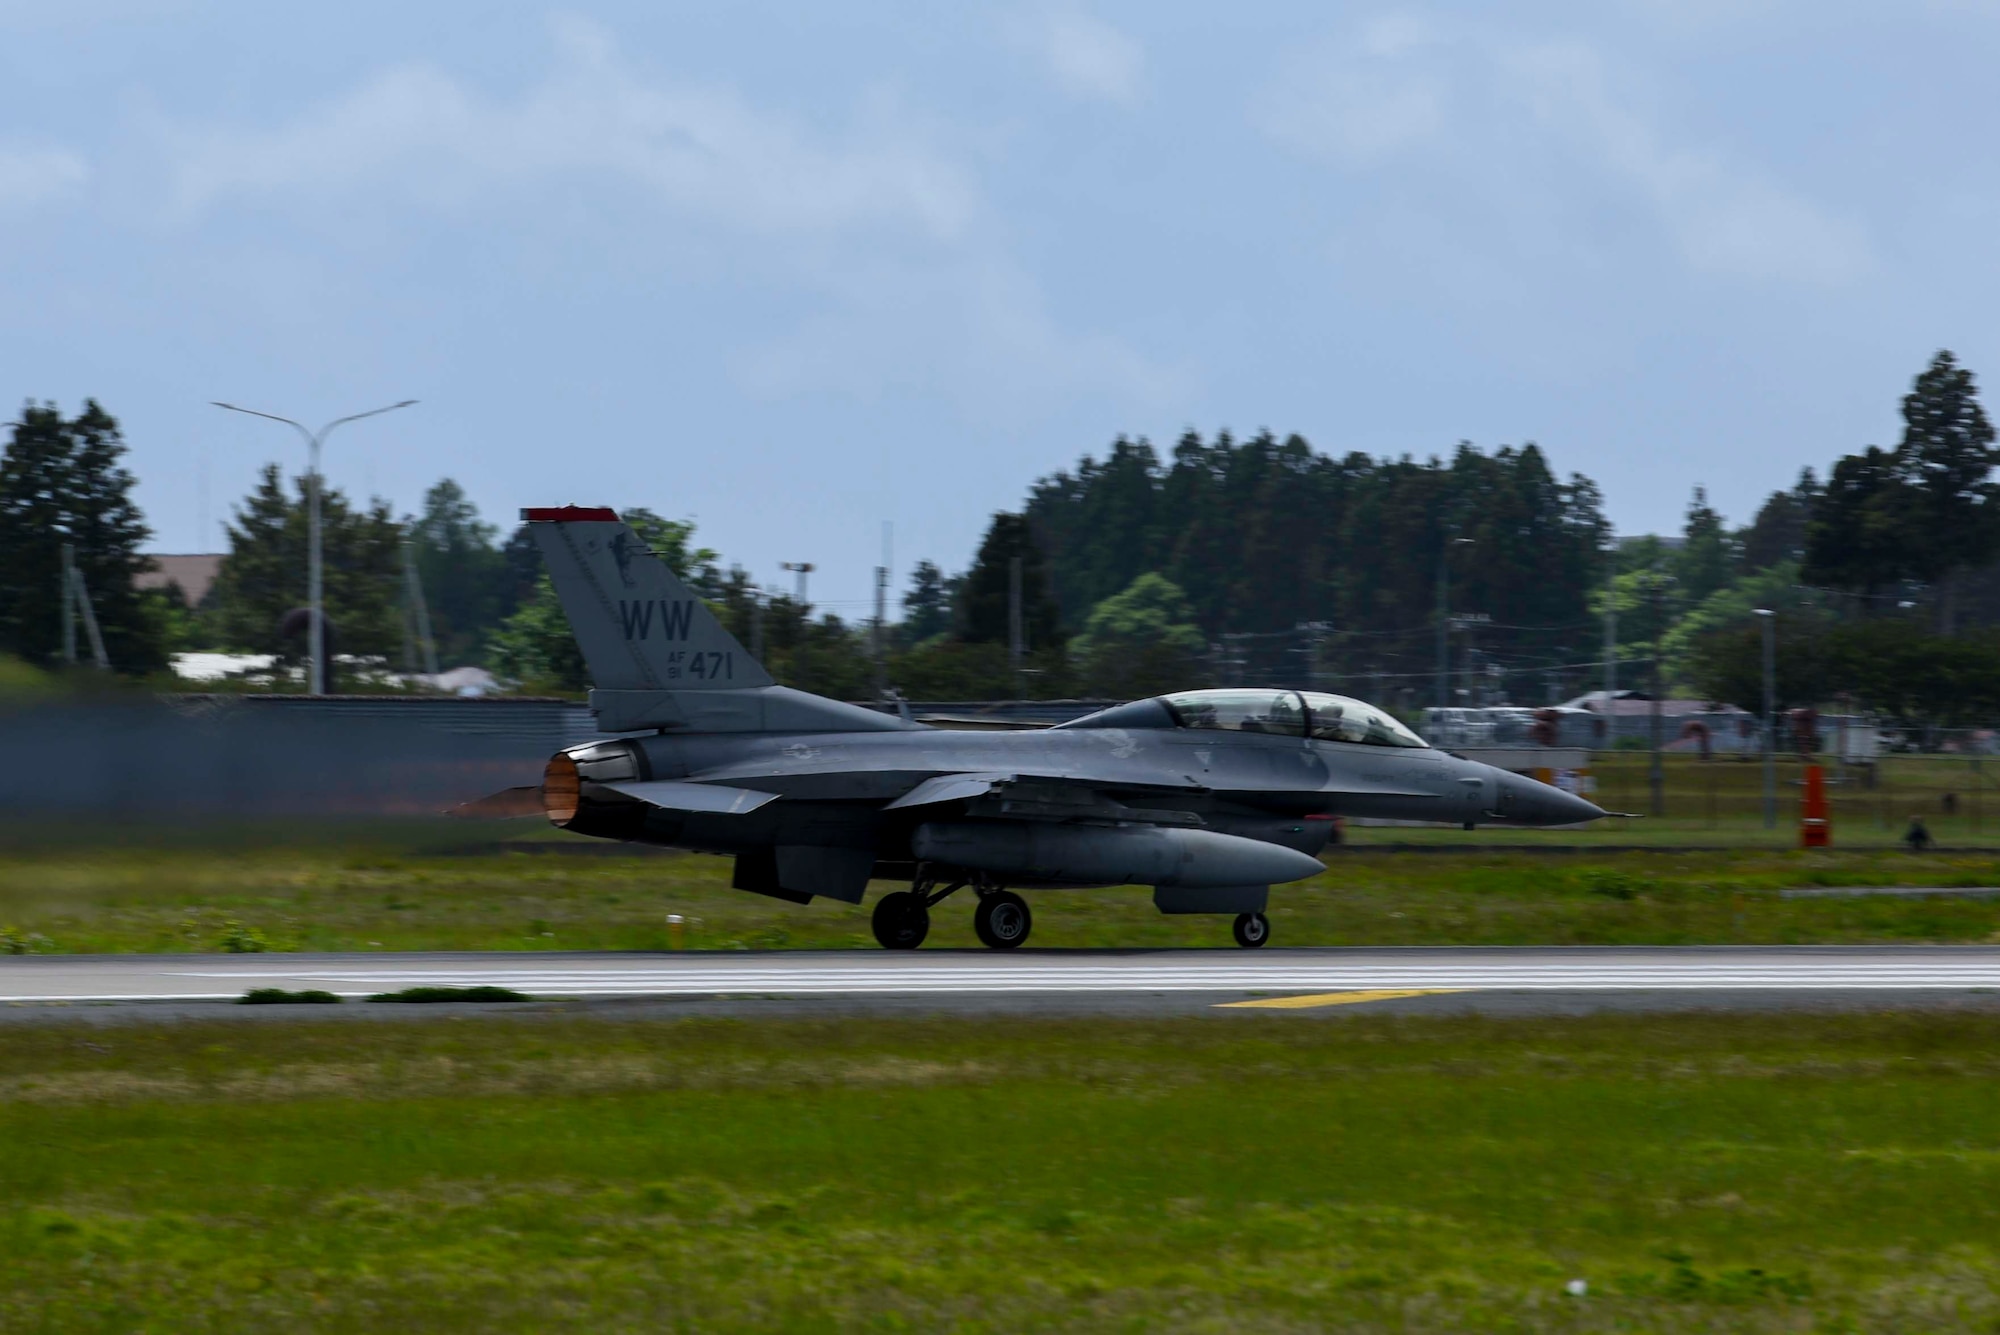 A U.S. Air Force F-16 Fighting Falcon with Col. Michael Richard, 35th Fighter Wing commander, and Mr. Yoshinori Kohiyama, Misawa City mayor, perform a high-speed taxi down the runway at Misawa Air Base, Japan, May 17, 2024. This demonstration showcased the power and agility of the F-16 Fighting Falcon. The event was part of the 'Wing Commander for a Day' program, which aims to enhance community relations and provide local leaders with an in-depth understanding of the 35th Fighter Wing's operational capabilities and commitment to regional security. (U.S. Air Force photo by Staff Sgt. Kristen Heller)